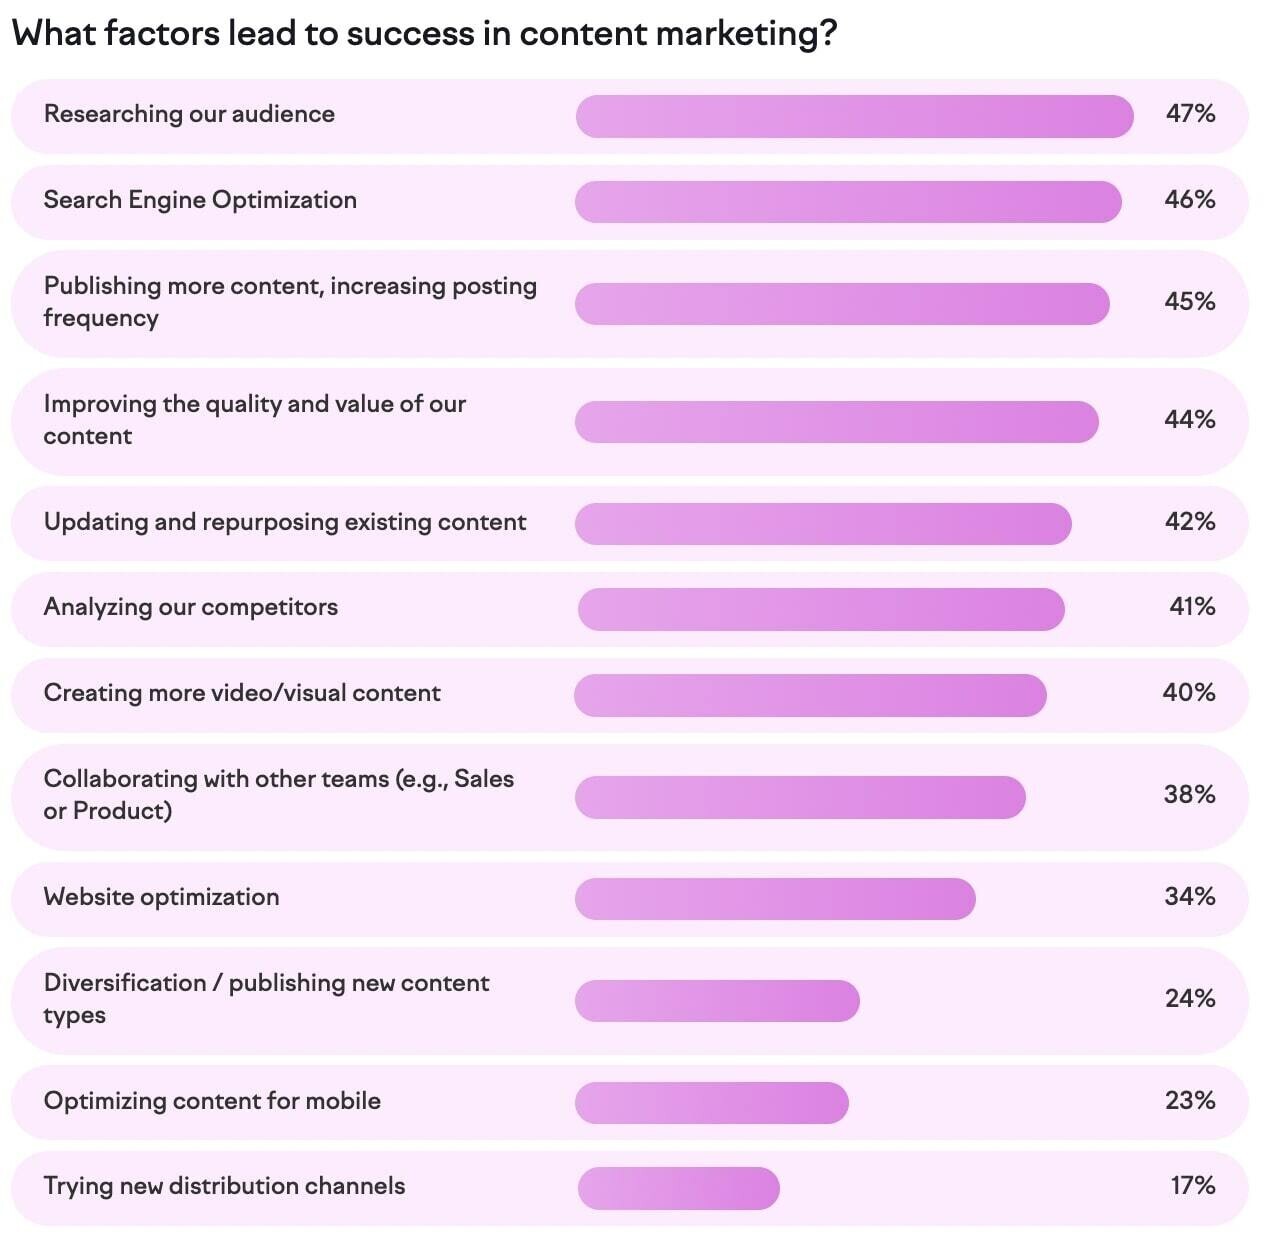 an image showing survey responses to "what factors lead to success in content marketing?"